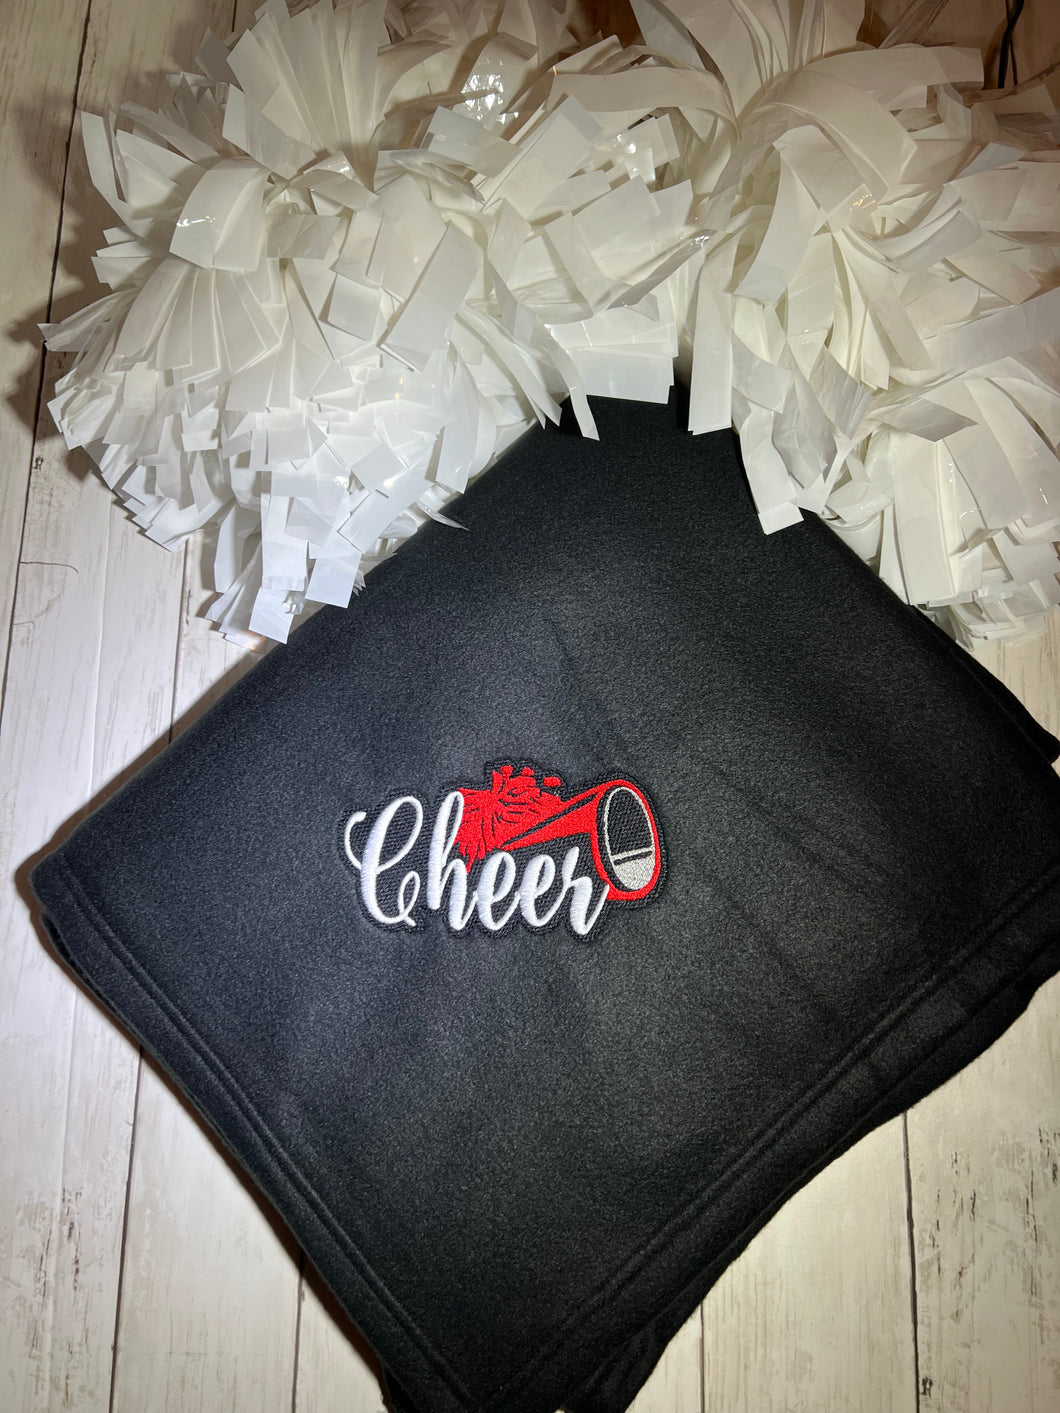 Embroidered Cheer Blanket